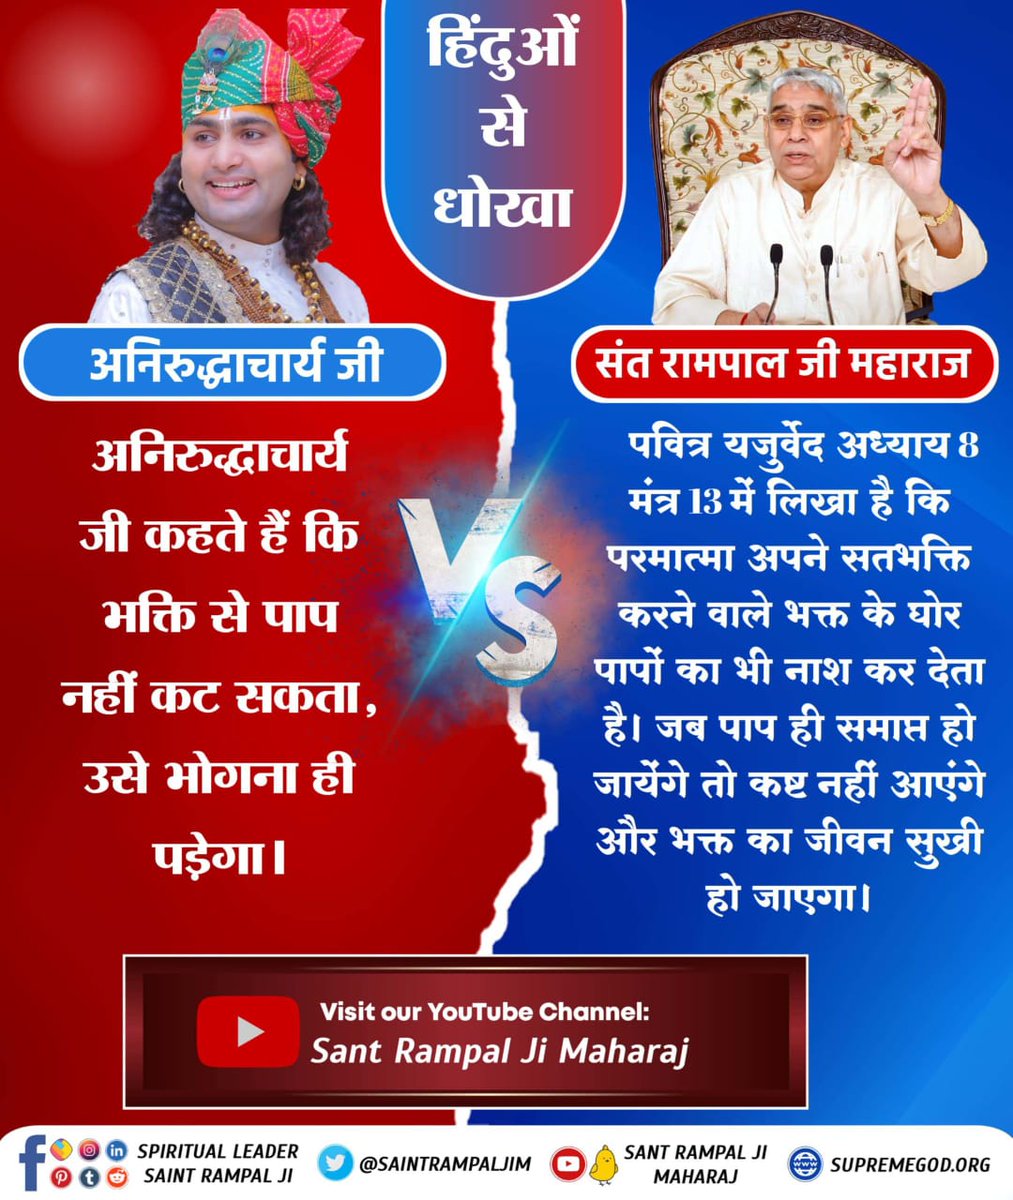 Aniruddhacharya ji says that sin cann't be cured by devotion it will have to be suffered. Saint Rampal Ji Maharaj explains that it's written in Holy Yajurveda Chapter 8 Mantra 13 that God can destroy even the grave sins of a devotee who does true devotion. #HinduBhai_Dhokhe_Mein